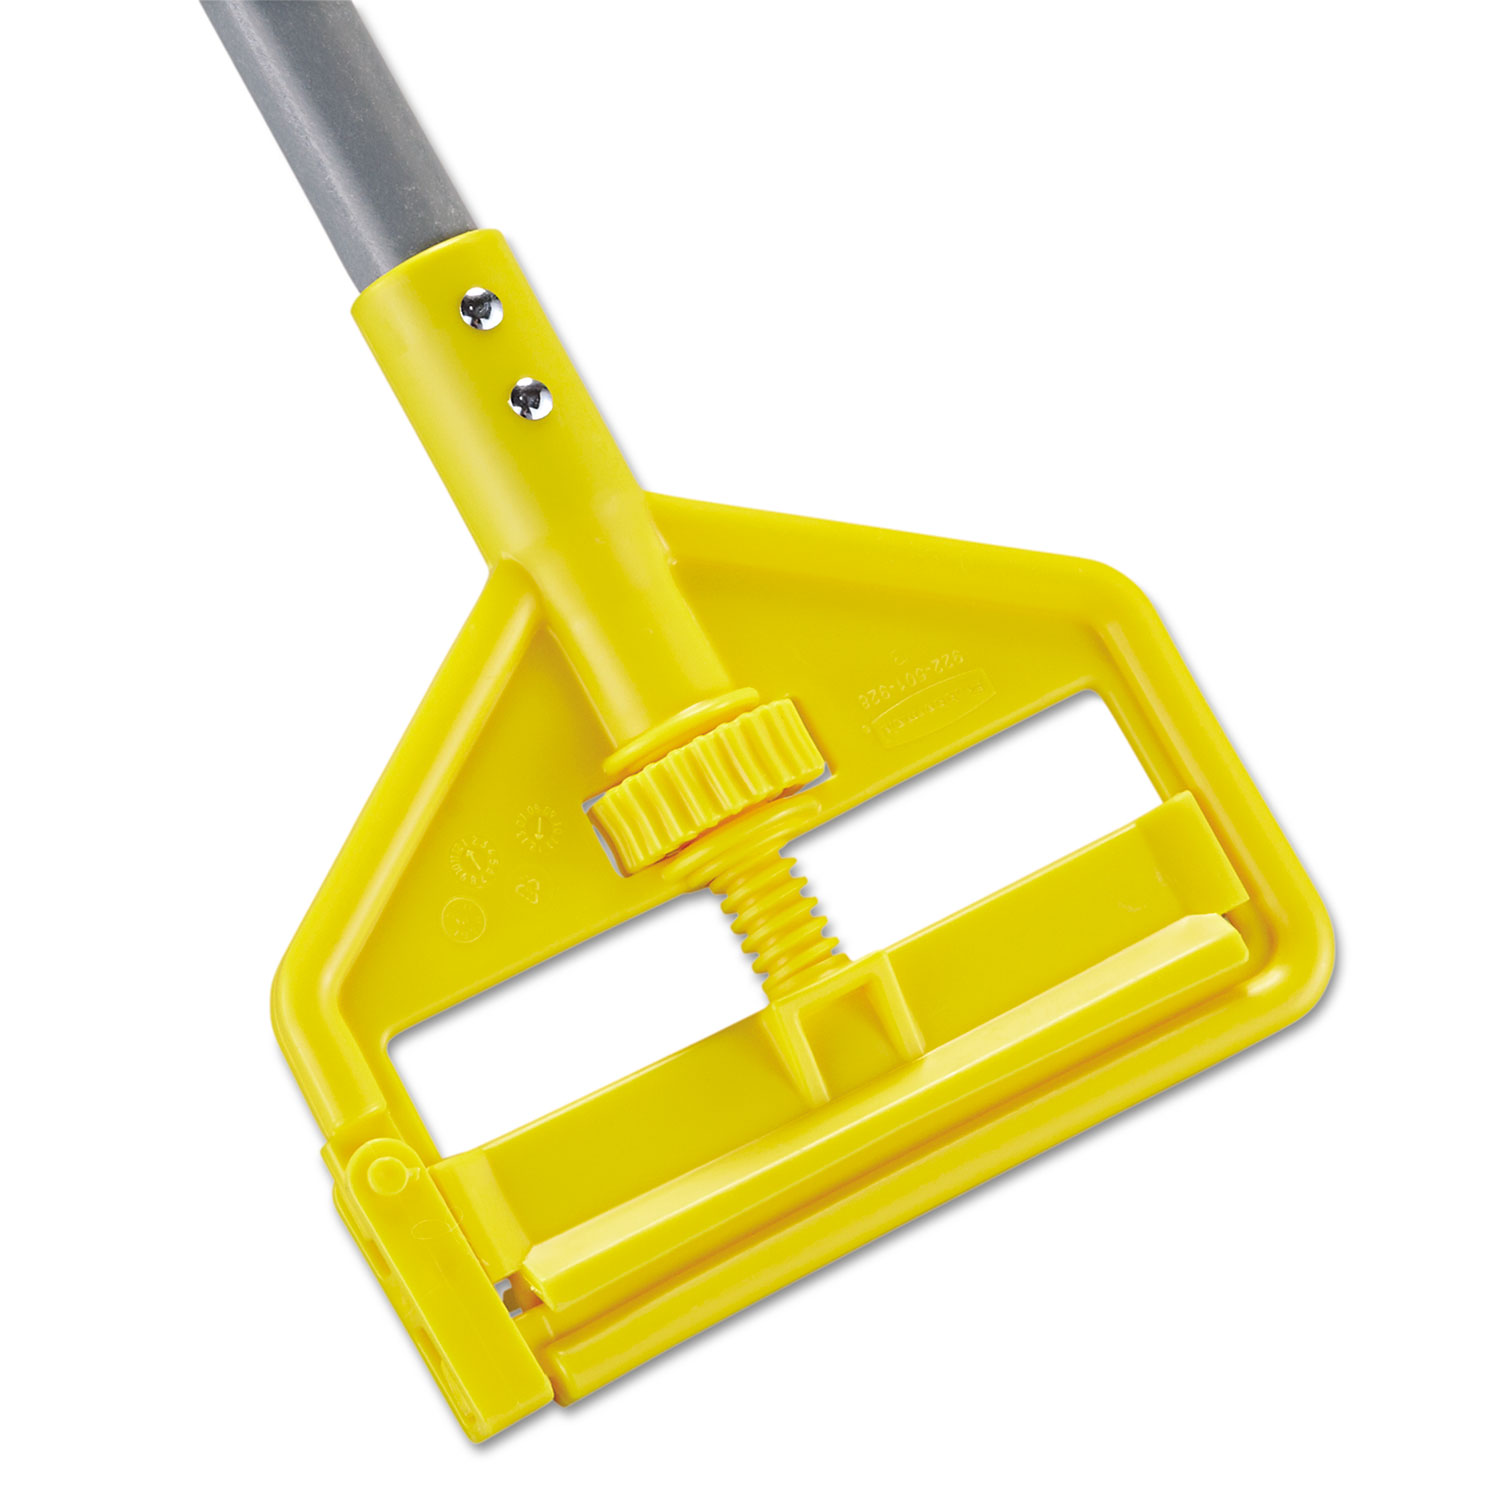  Rubbermaid Commercial FGH14600GY00 Invader Fiberglass Side-Gate Wet-Mop Handle, 1 dia x 60, Gray/Yellow (RCPH146) 